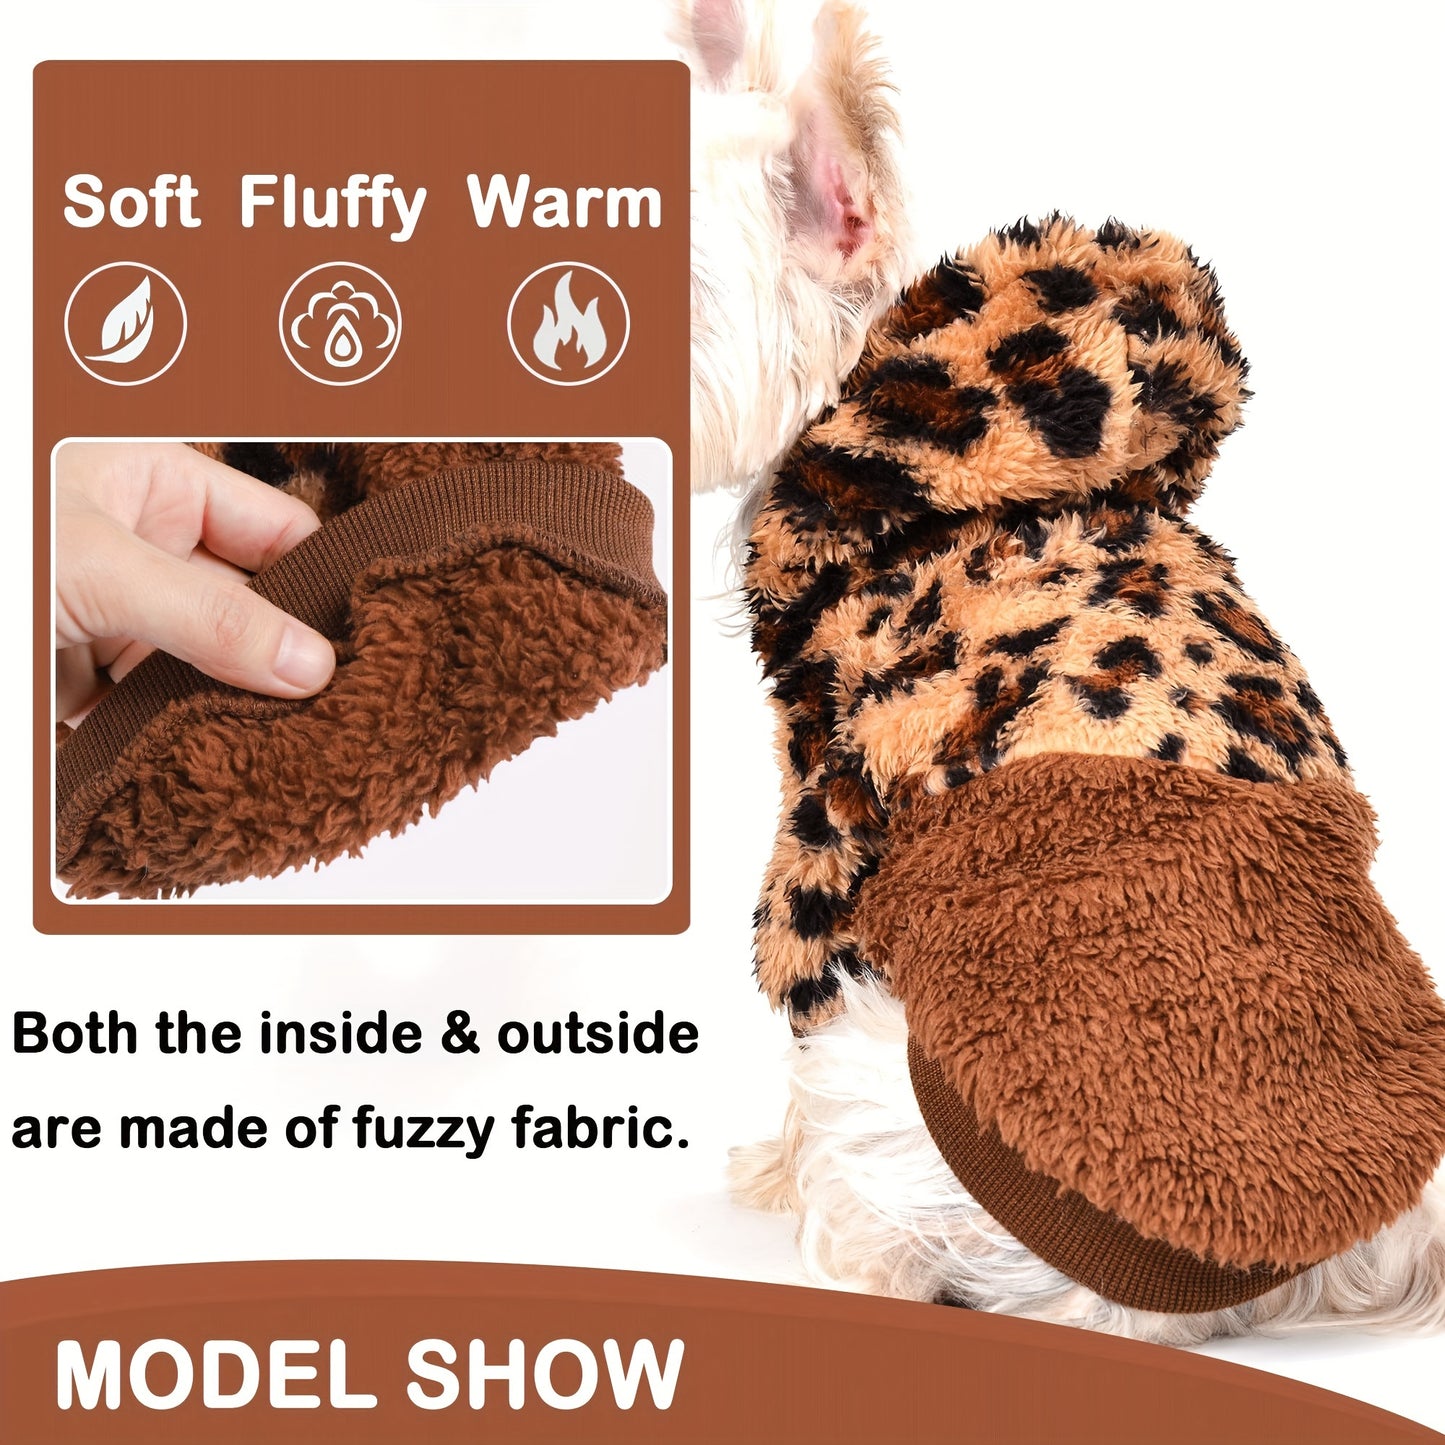 Lightweight Dog Sweaters For Puppy Small Dogs Clothes, Leopard Dog Hoodies Sweatshirts, Cold Weather Coat, Fuzzy Sweater